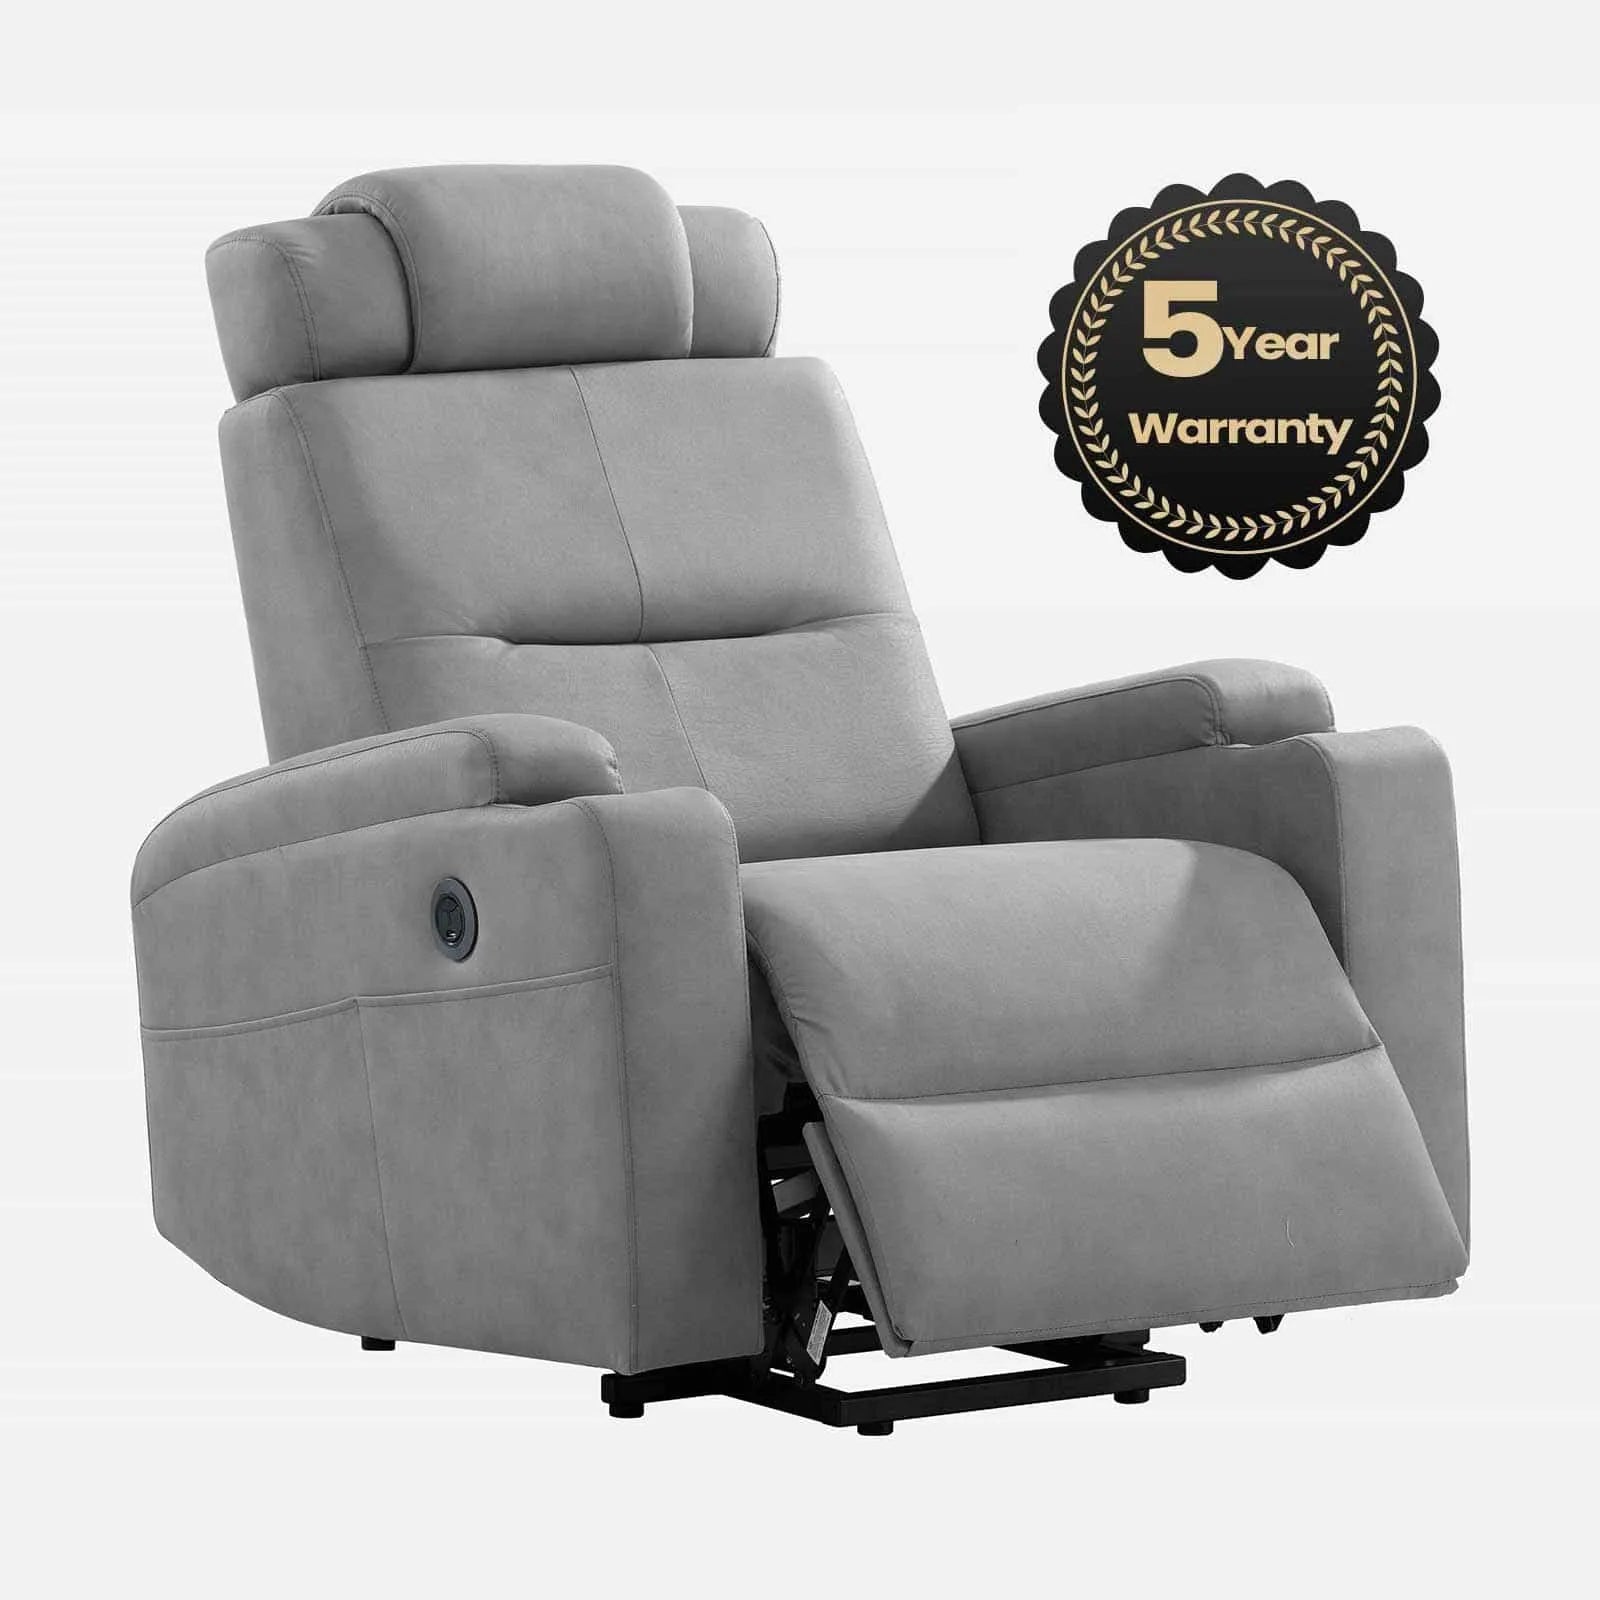 oasis pulse lift recliners with 5 year warranty